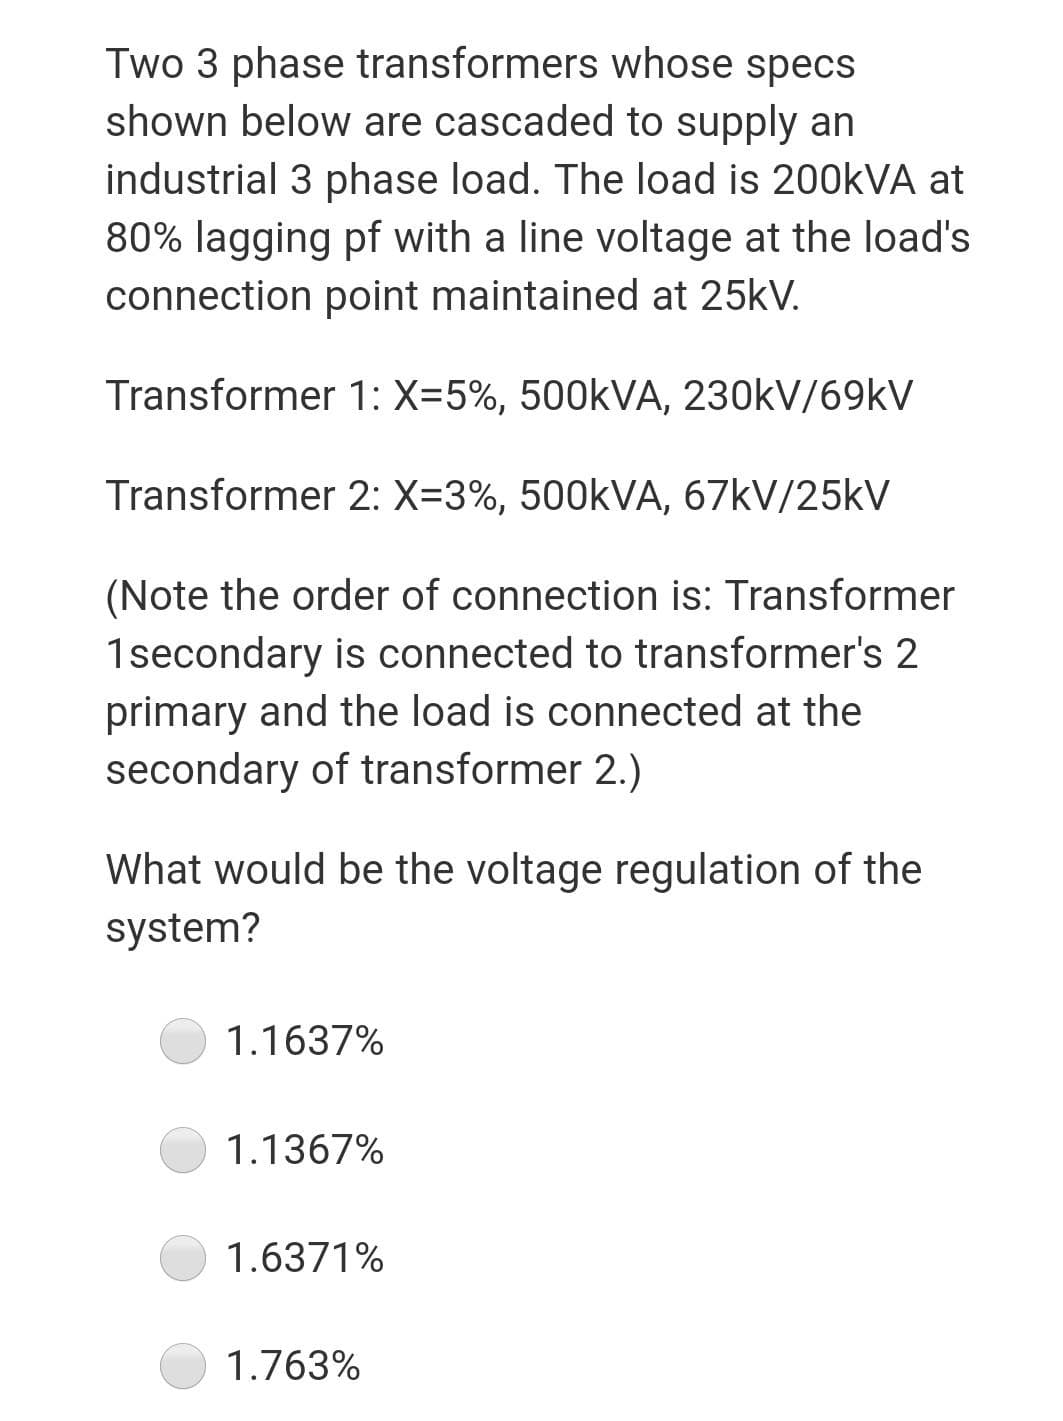 Two 3 phase transformers whose specs
shown below are cascaded to supply an
industrial 3 phase load. The load is 200KVA at
80% lagging pf with a line voltage at the load's
connection point maintained at 25kV.
Transformer 1: X=5%, 500KVA, 230kV/69KV
Transformer 2: X=3%, 500KVA, 67kV/25kV
(Note the order of connection is: Transformer
1secondary is connected to transformer's 2
primary and the load is connected at the
secondary of transformer 2.)
What would be the voltage regulation of the
system?
1.1637%
1.1367%
1.6371%
1.763%
